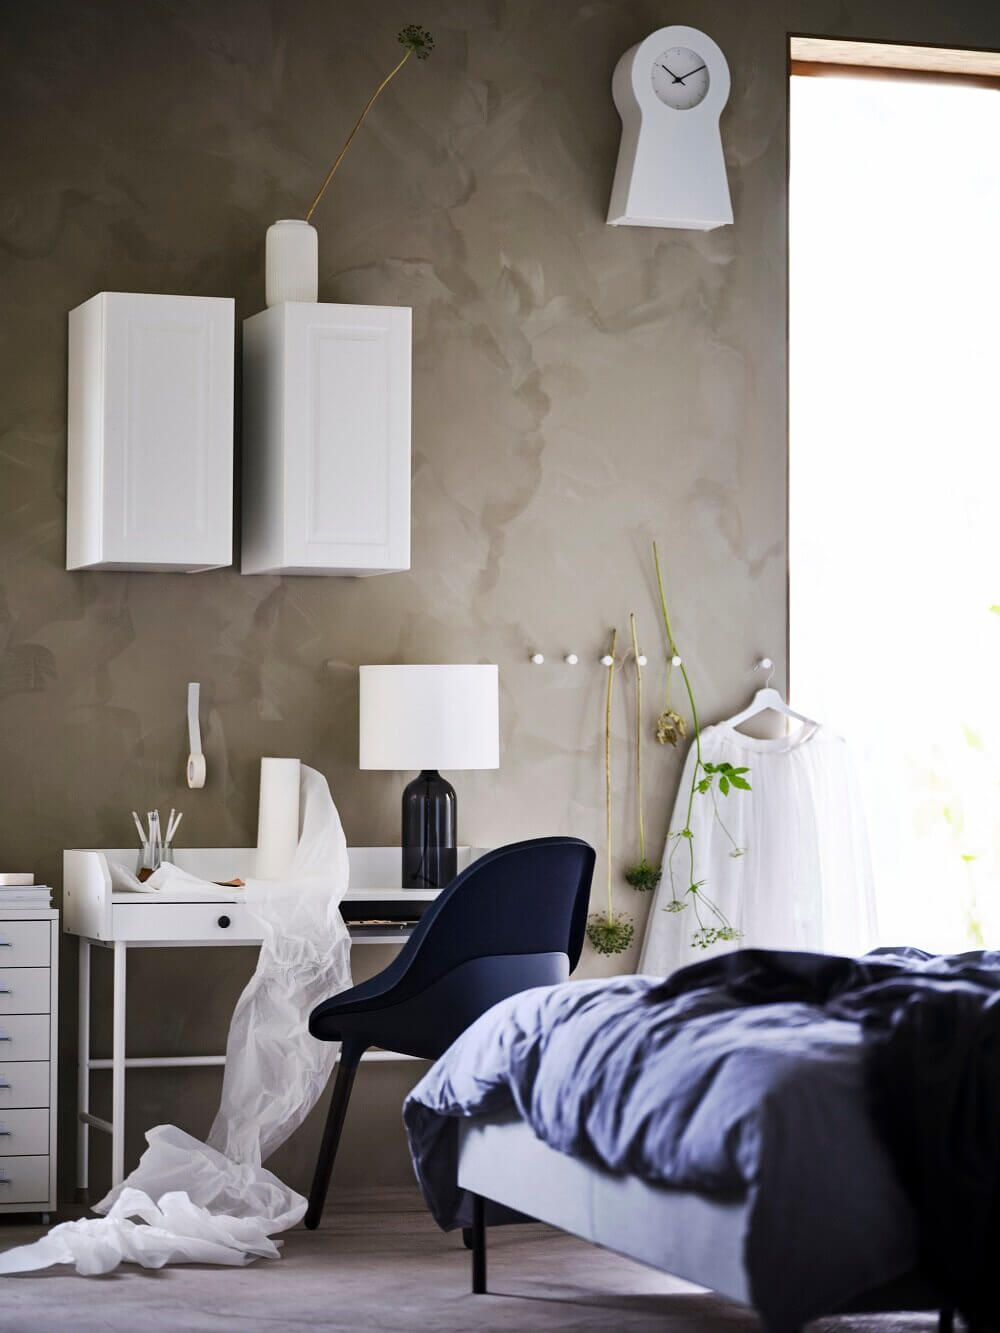 home organizing ideas ikea nordroom38 Clever and Stylish Home Organizing Ideas From IKEA